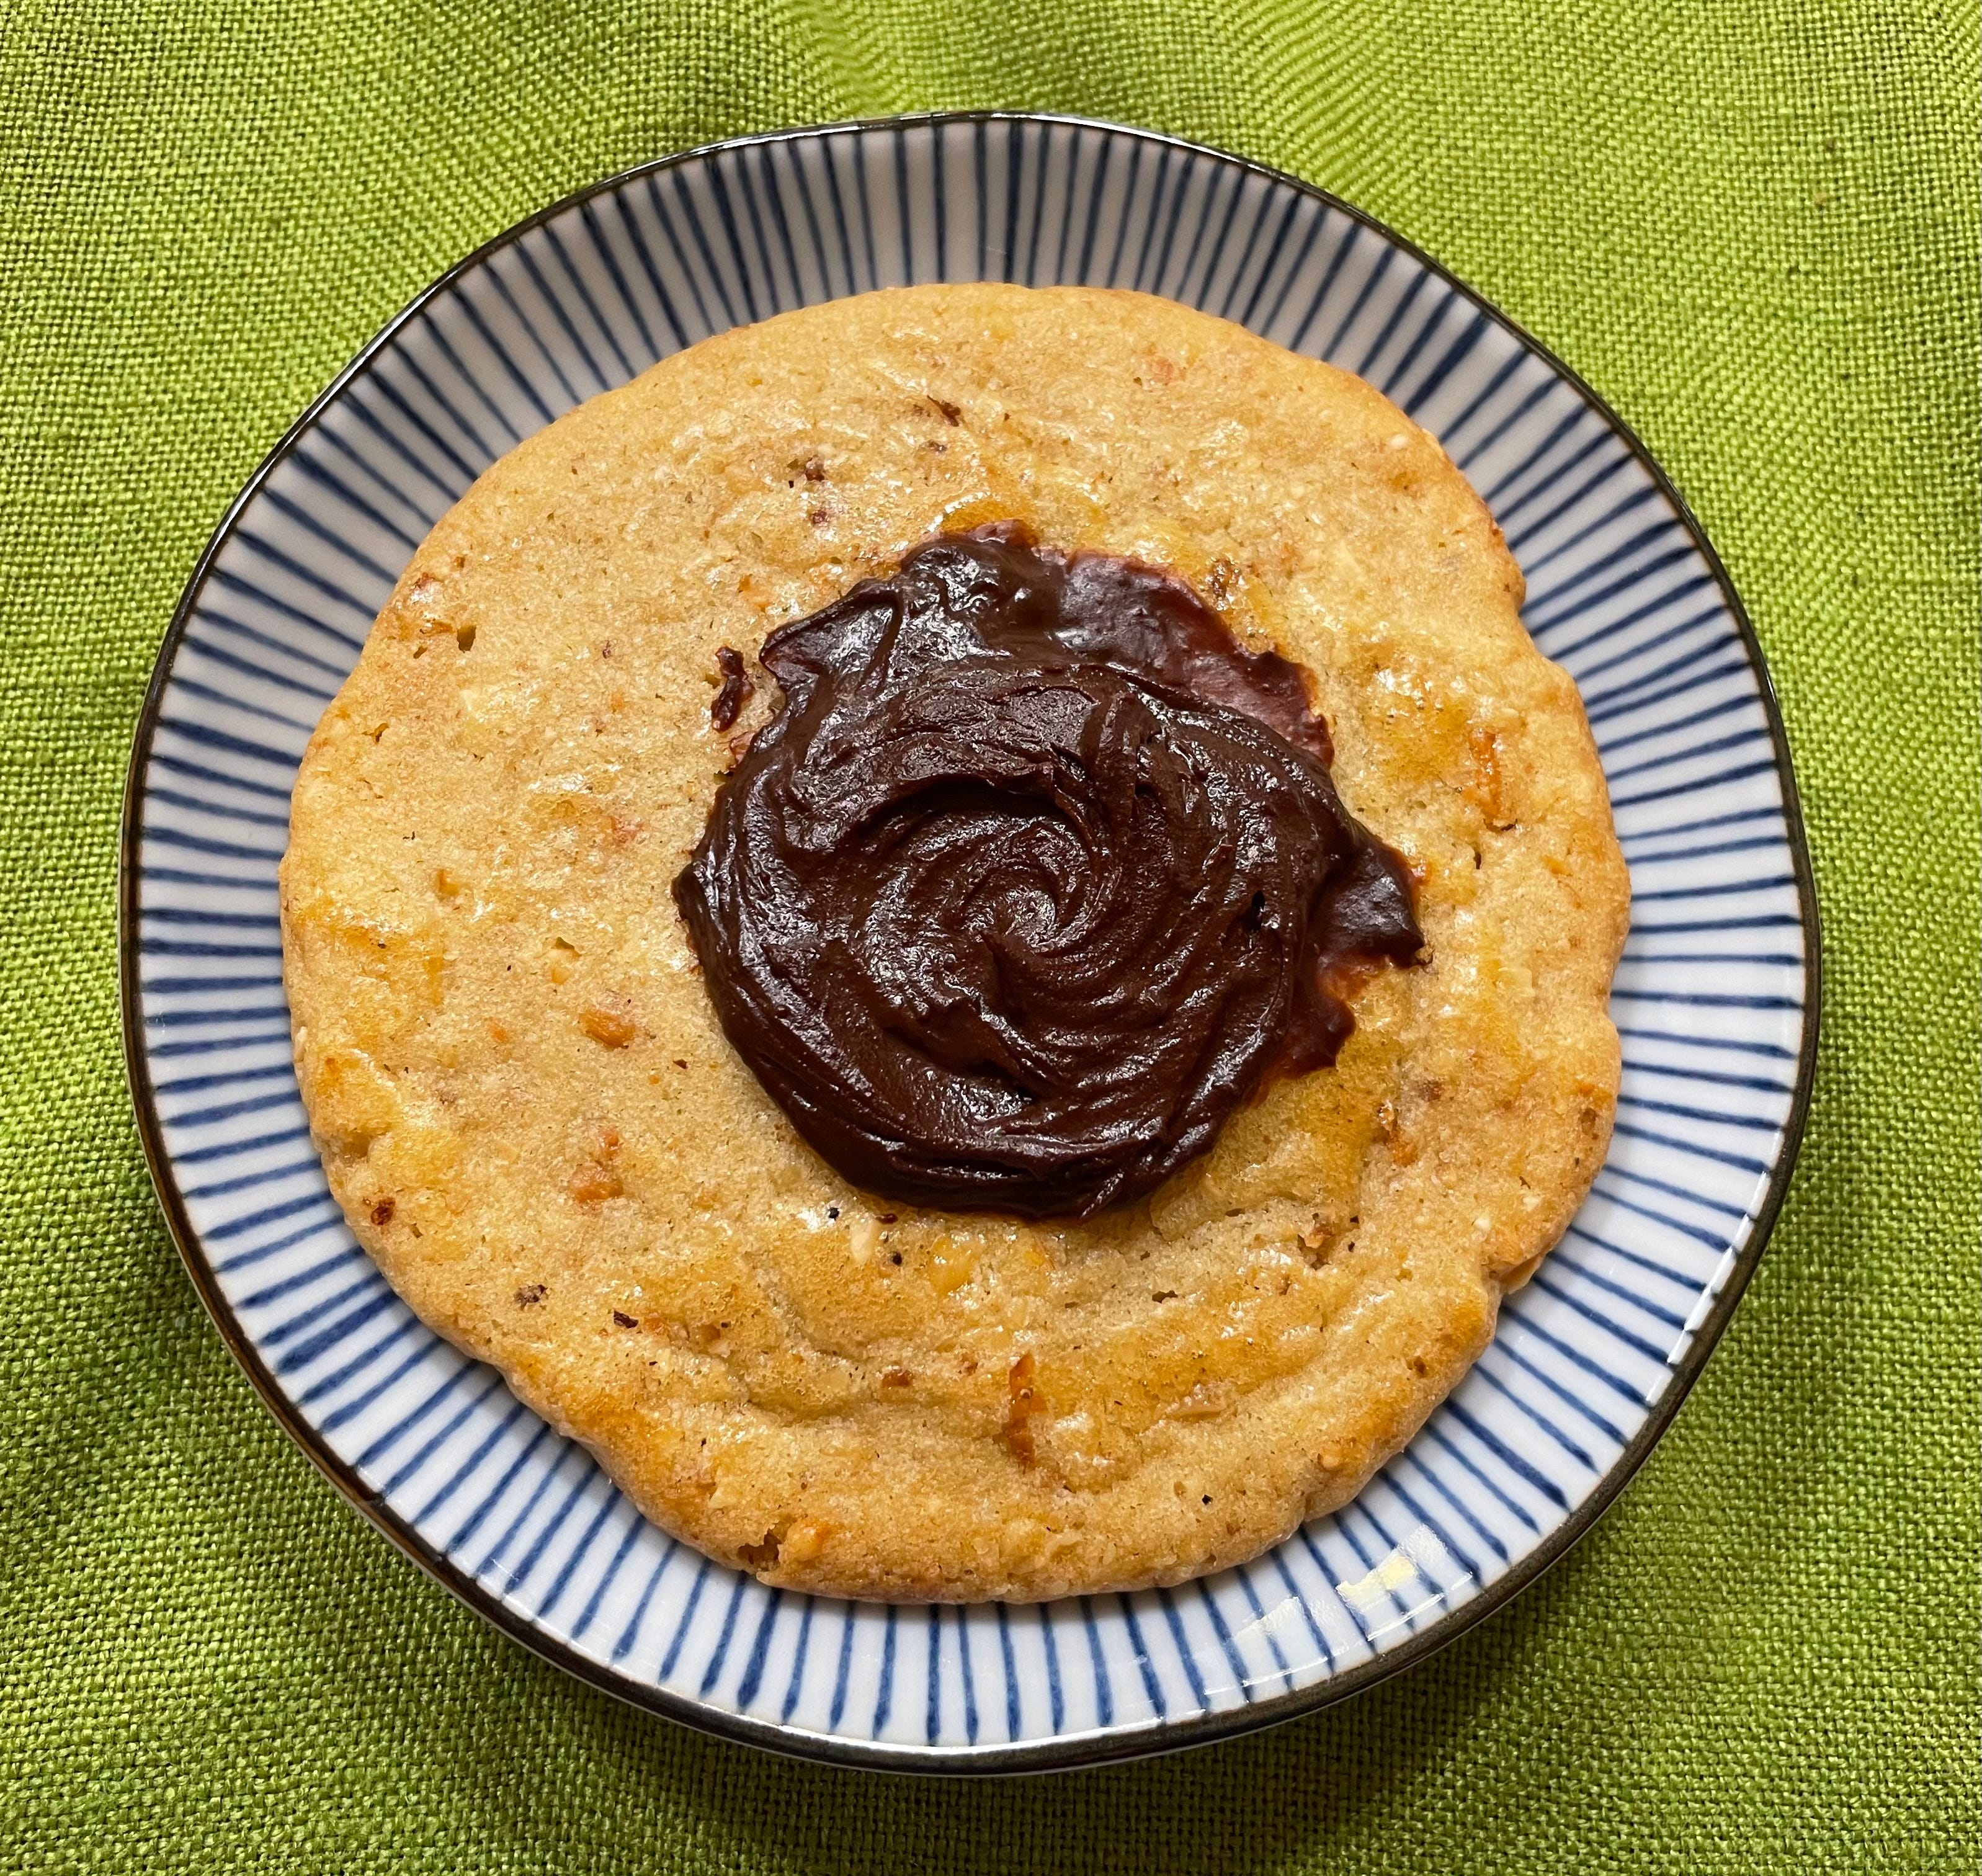 Butter cookie - Wikipedia